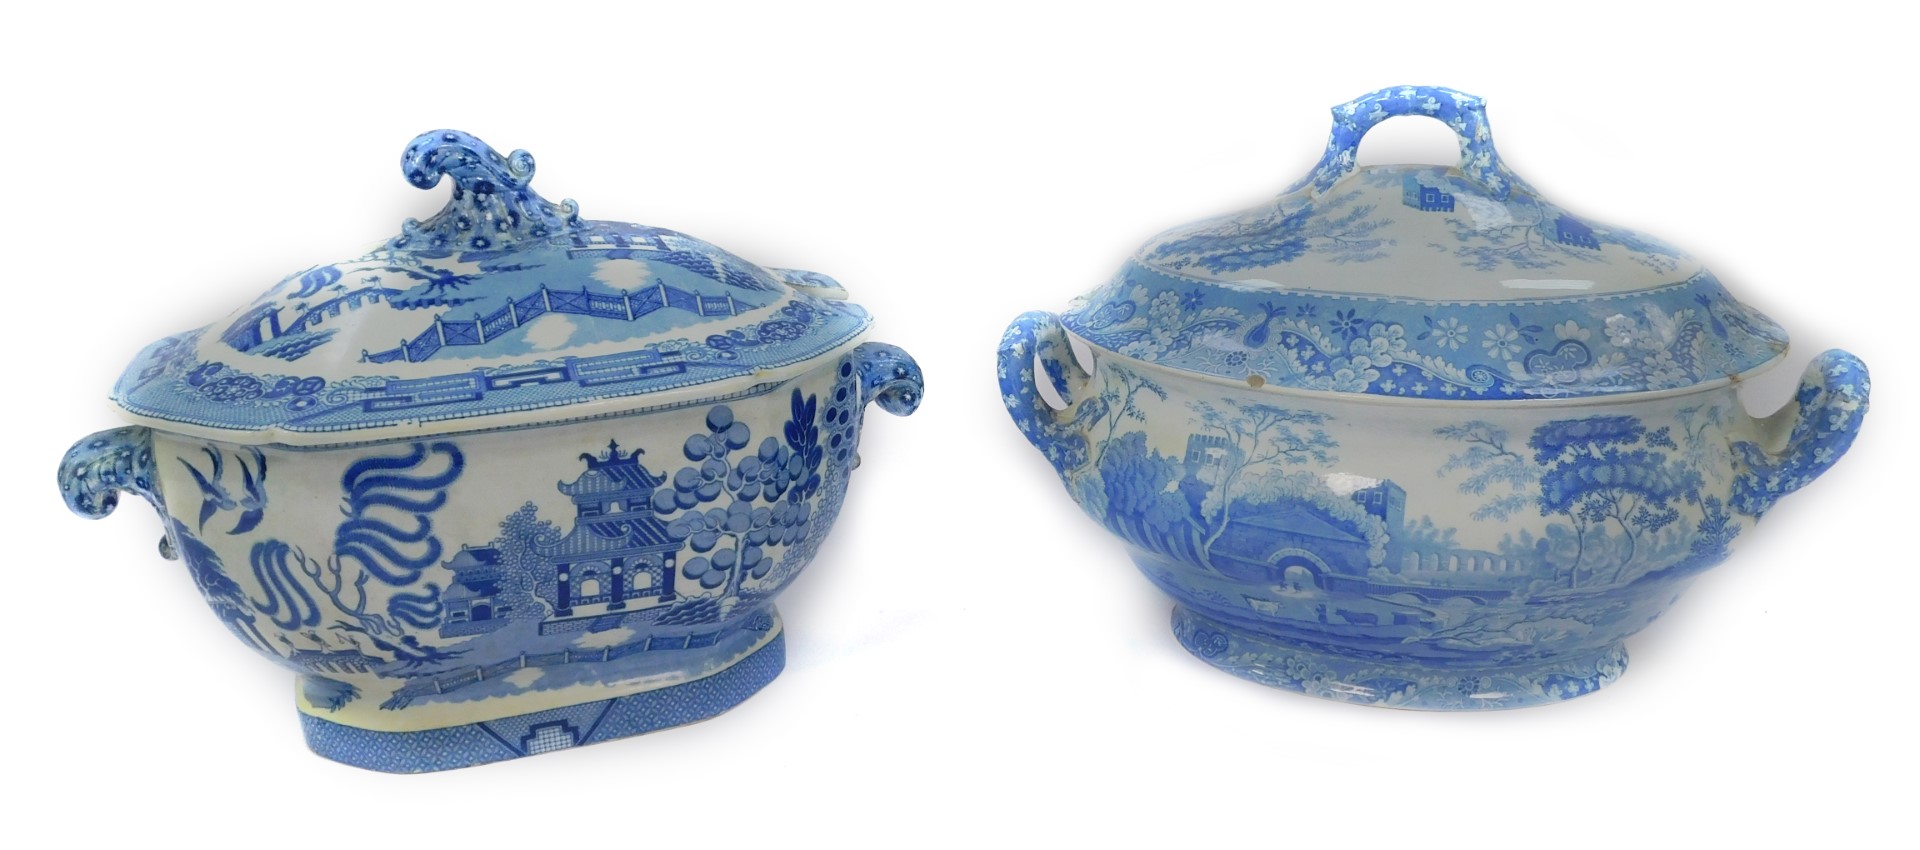 An early 19thC Spode blue and white soup tureen and cover, decorated in the tower pattern, of oval